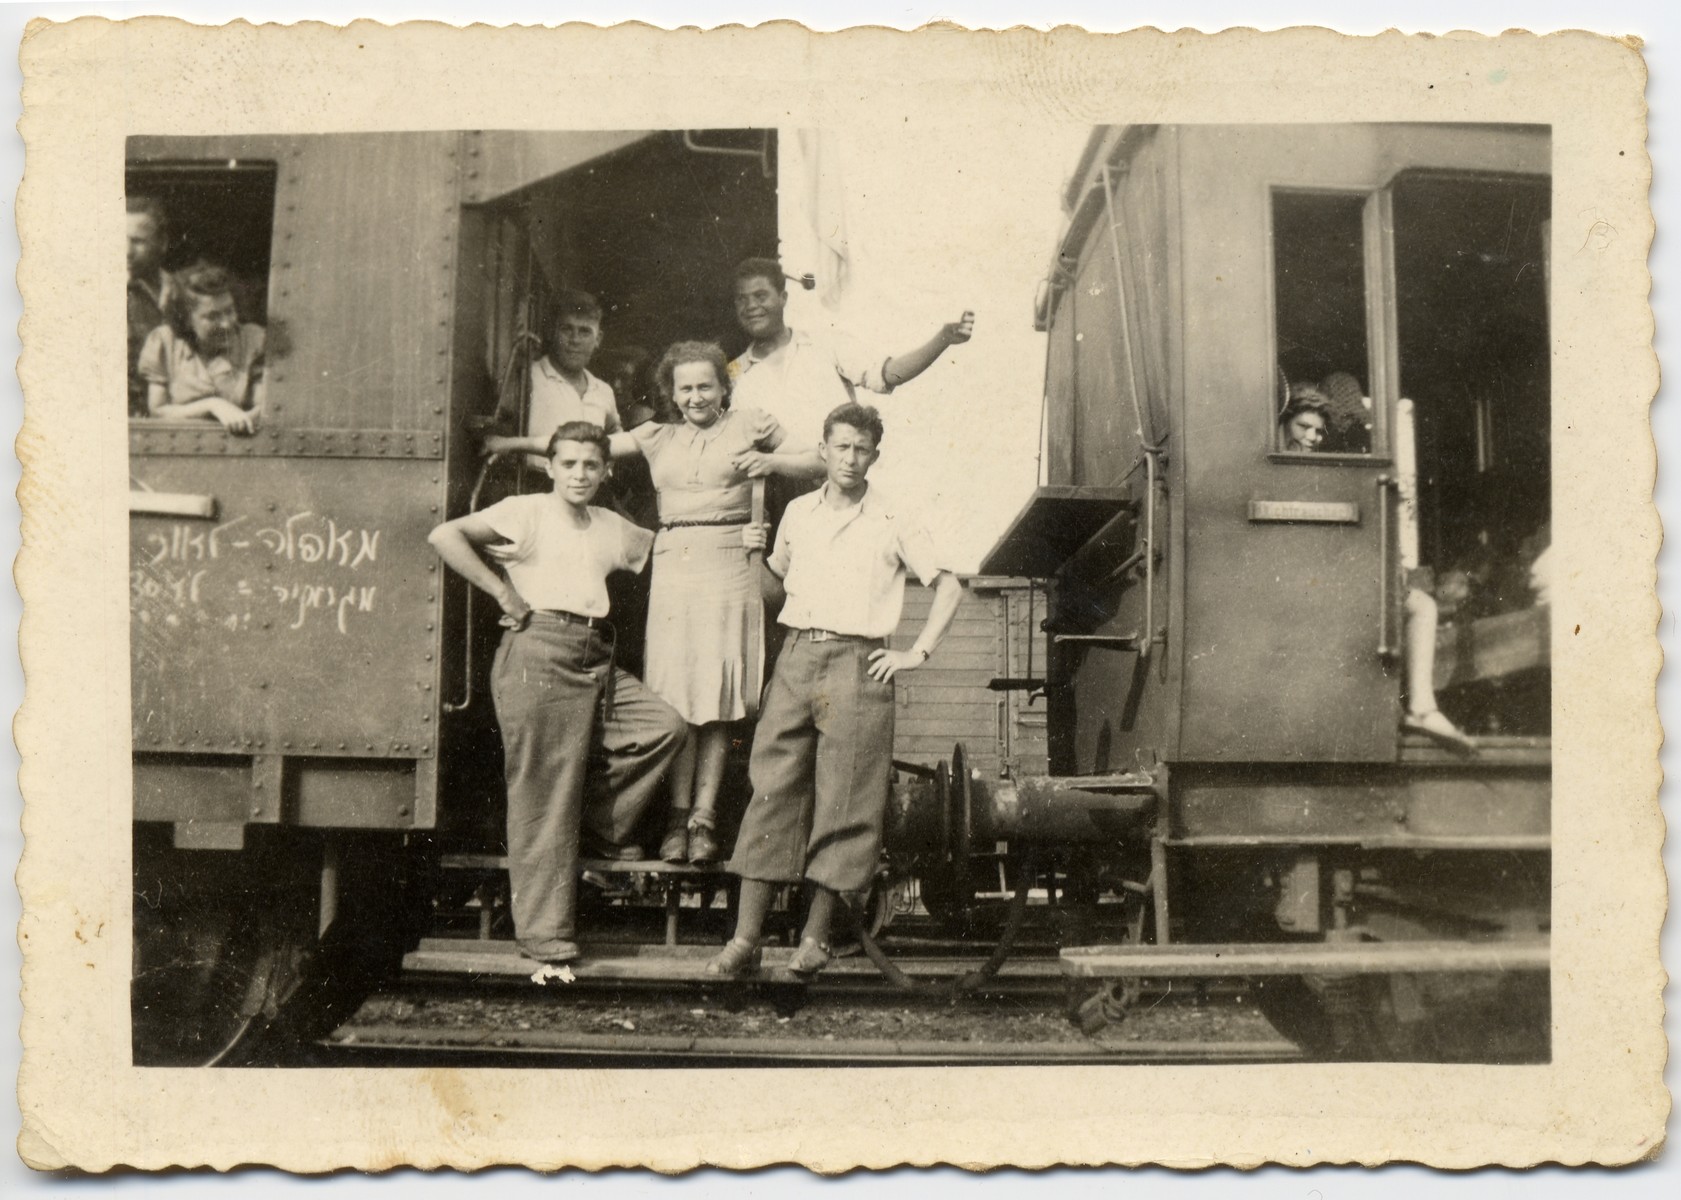 Jewish youth on a train taking them from Germany to Belgium.  The sign on the train reads in Hebrew: "From darkness to light; from Germany to Eretz Israel."

Among those pictured are the donor (on the left, first row) and Hela Schupper Rufeisen in the middle.